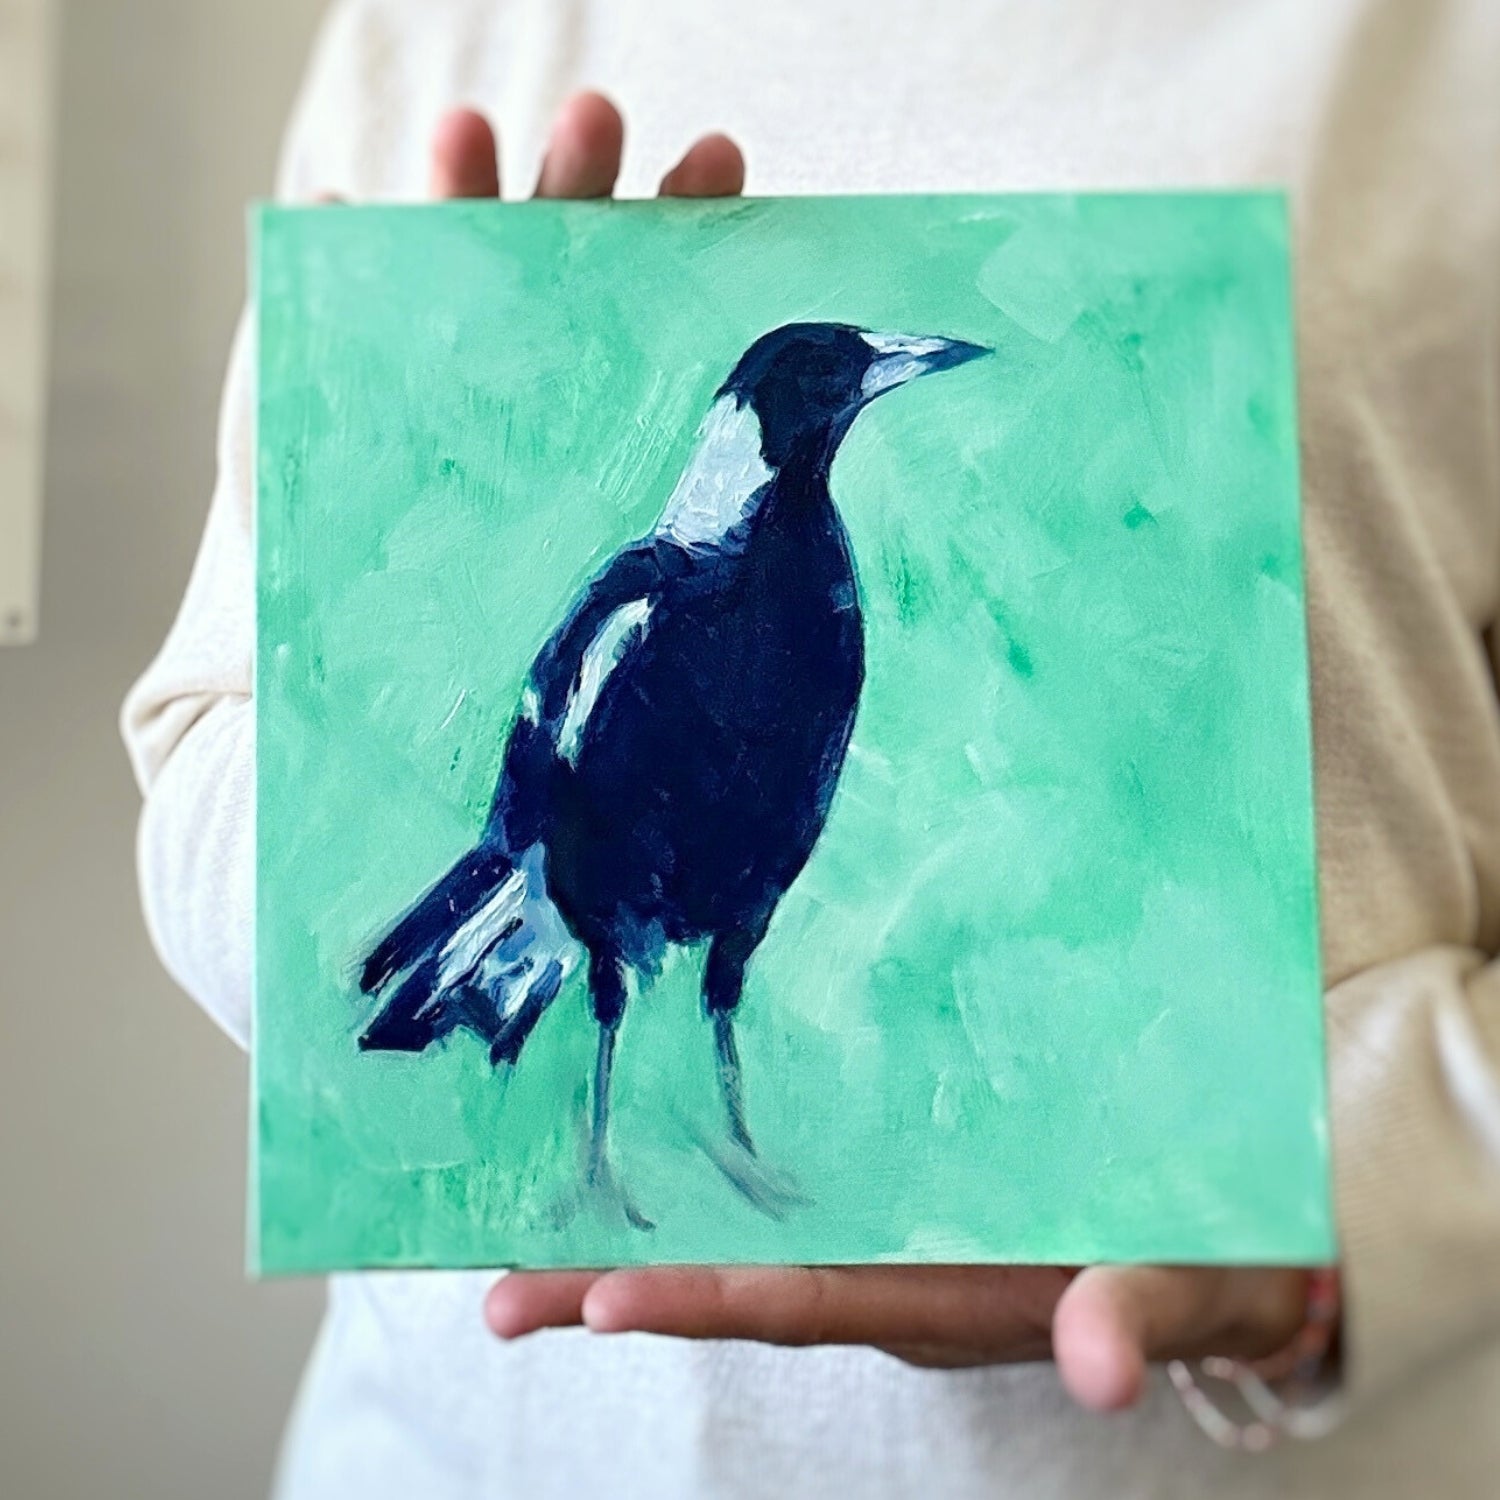 photo of a person holding an original oil painting of a navy blue and white magpie on a textured minty green background